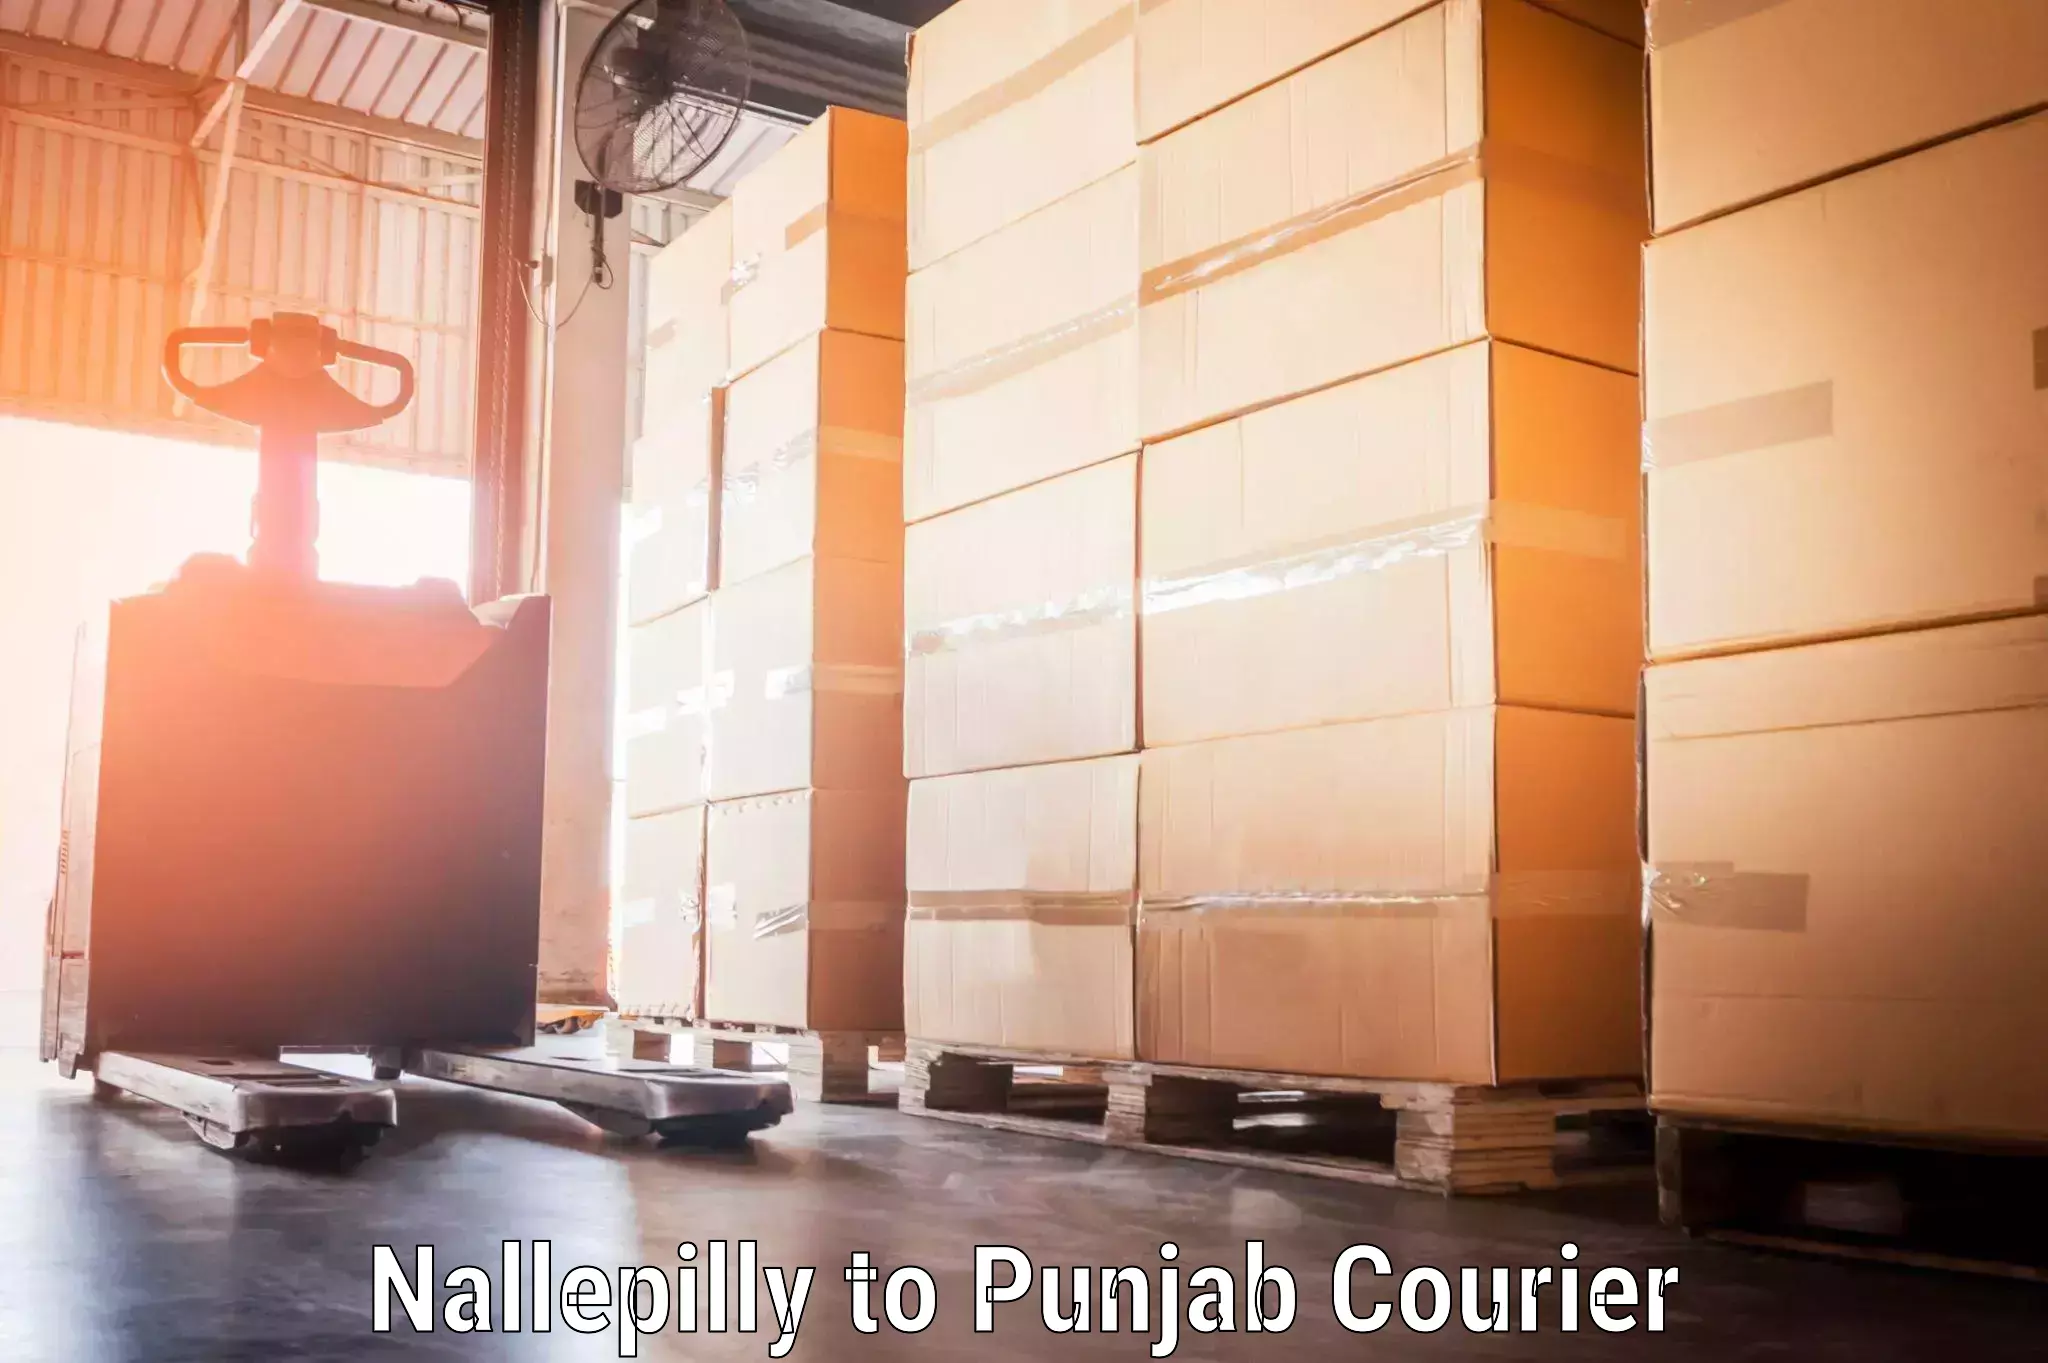 Excess baggage transport Nallepilly to Central University of Punjab Bathinda